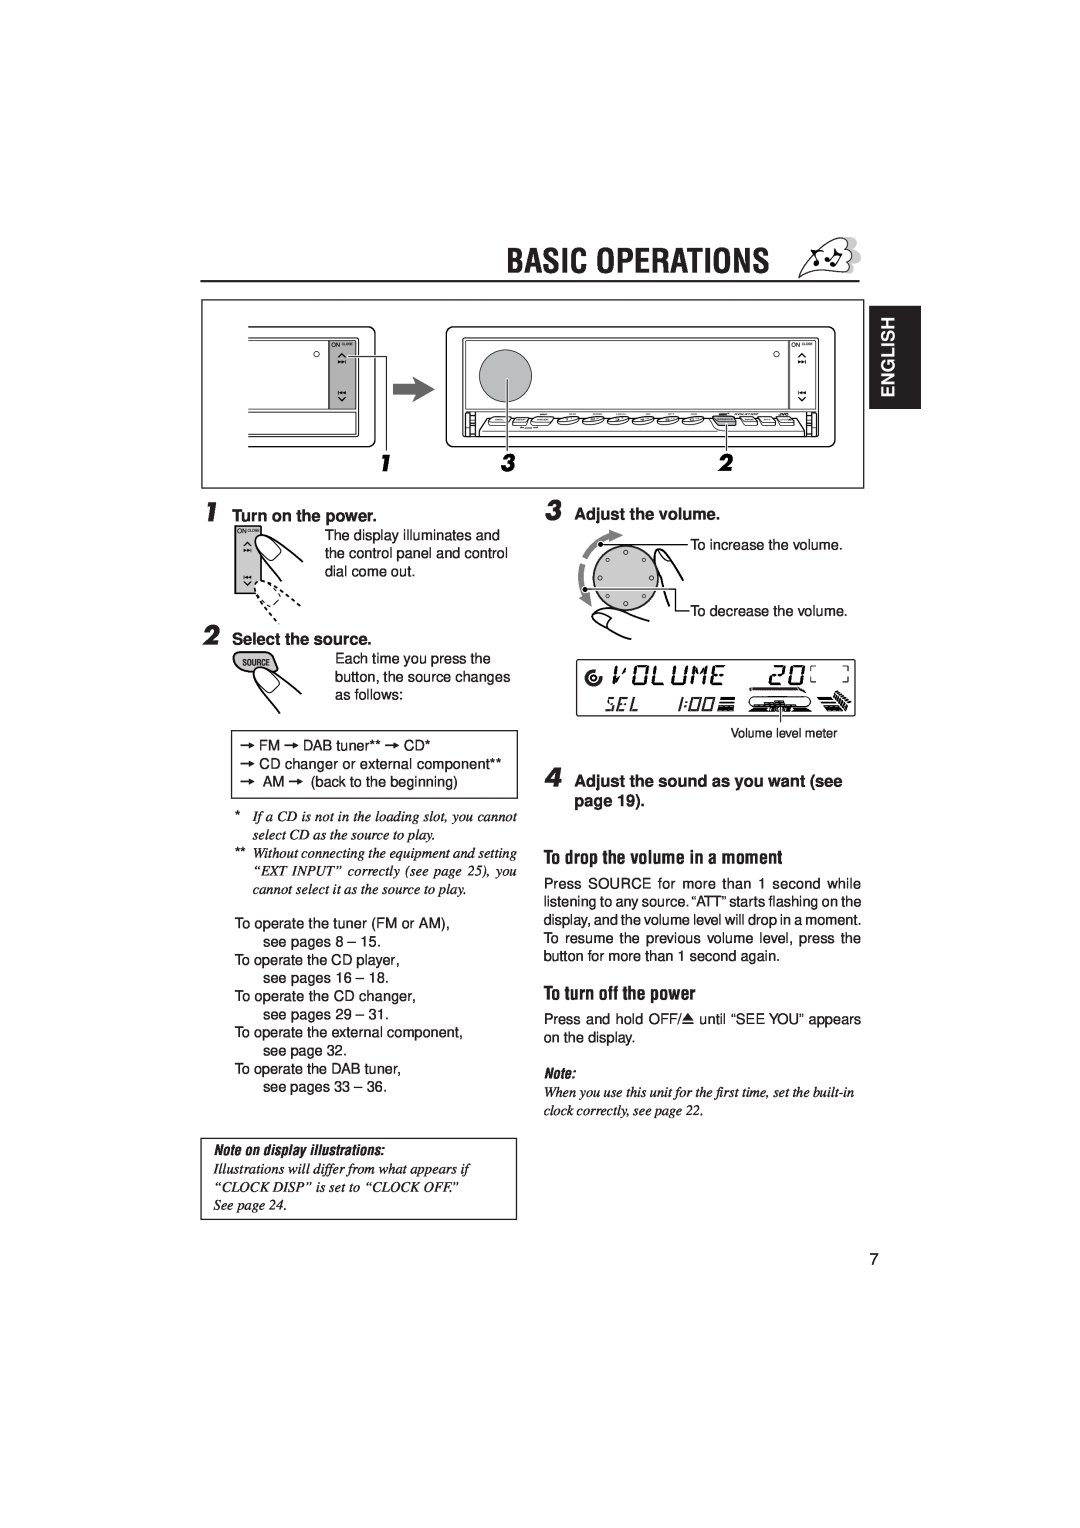 JVC KD-LX330R manual Basic Operations, English, To drop the volume in a moment, To turn off the power, Turn on the power 